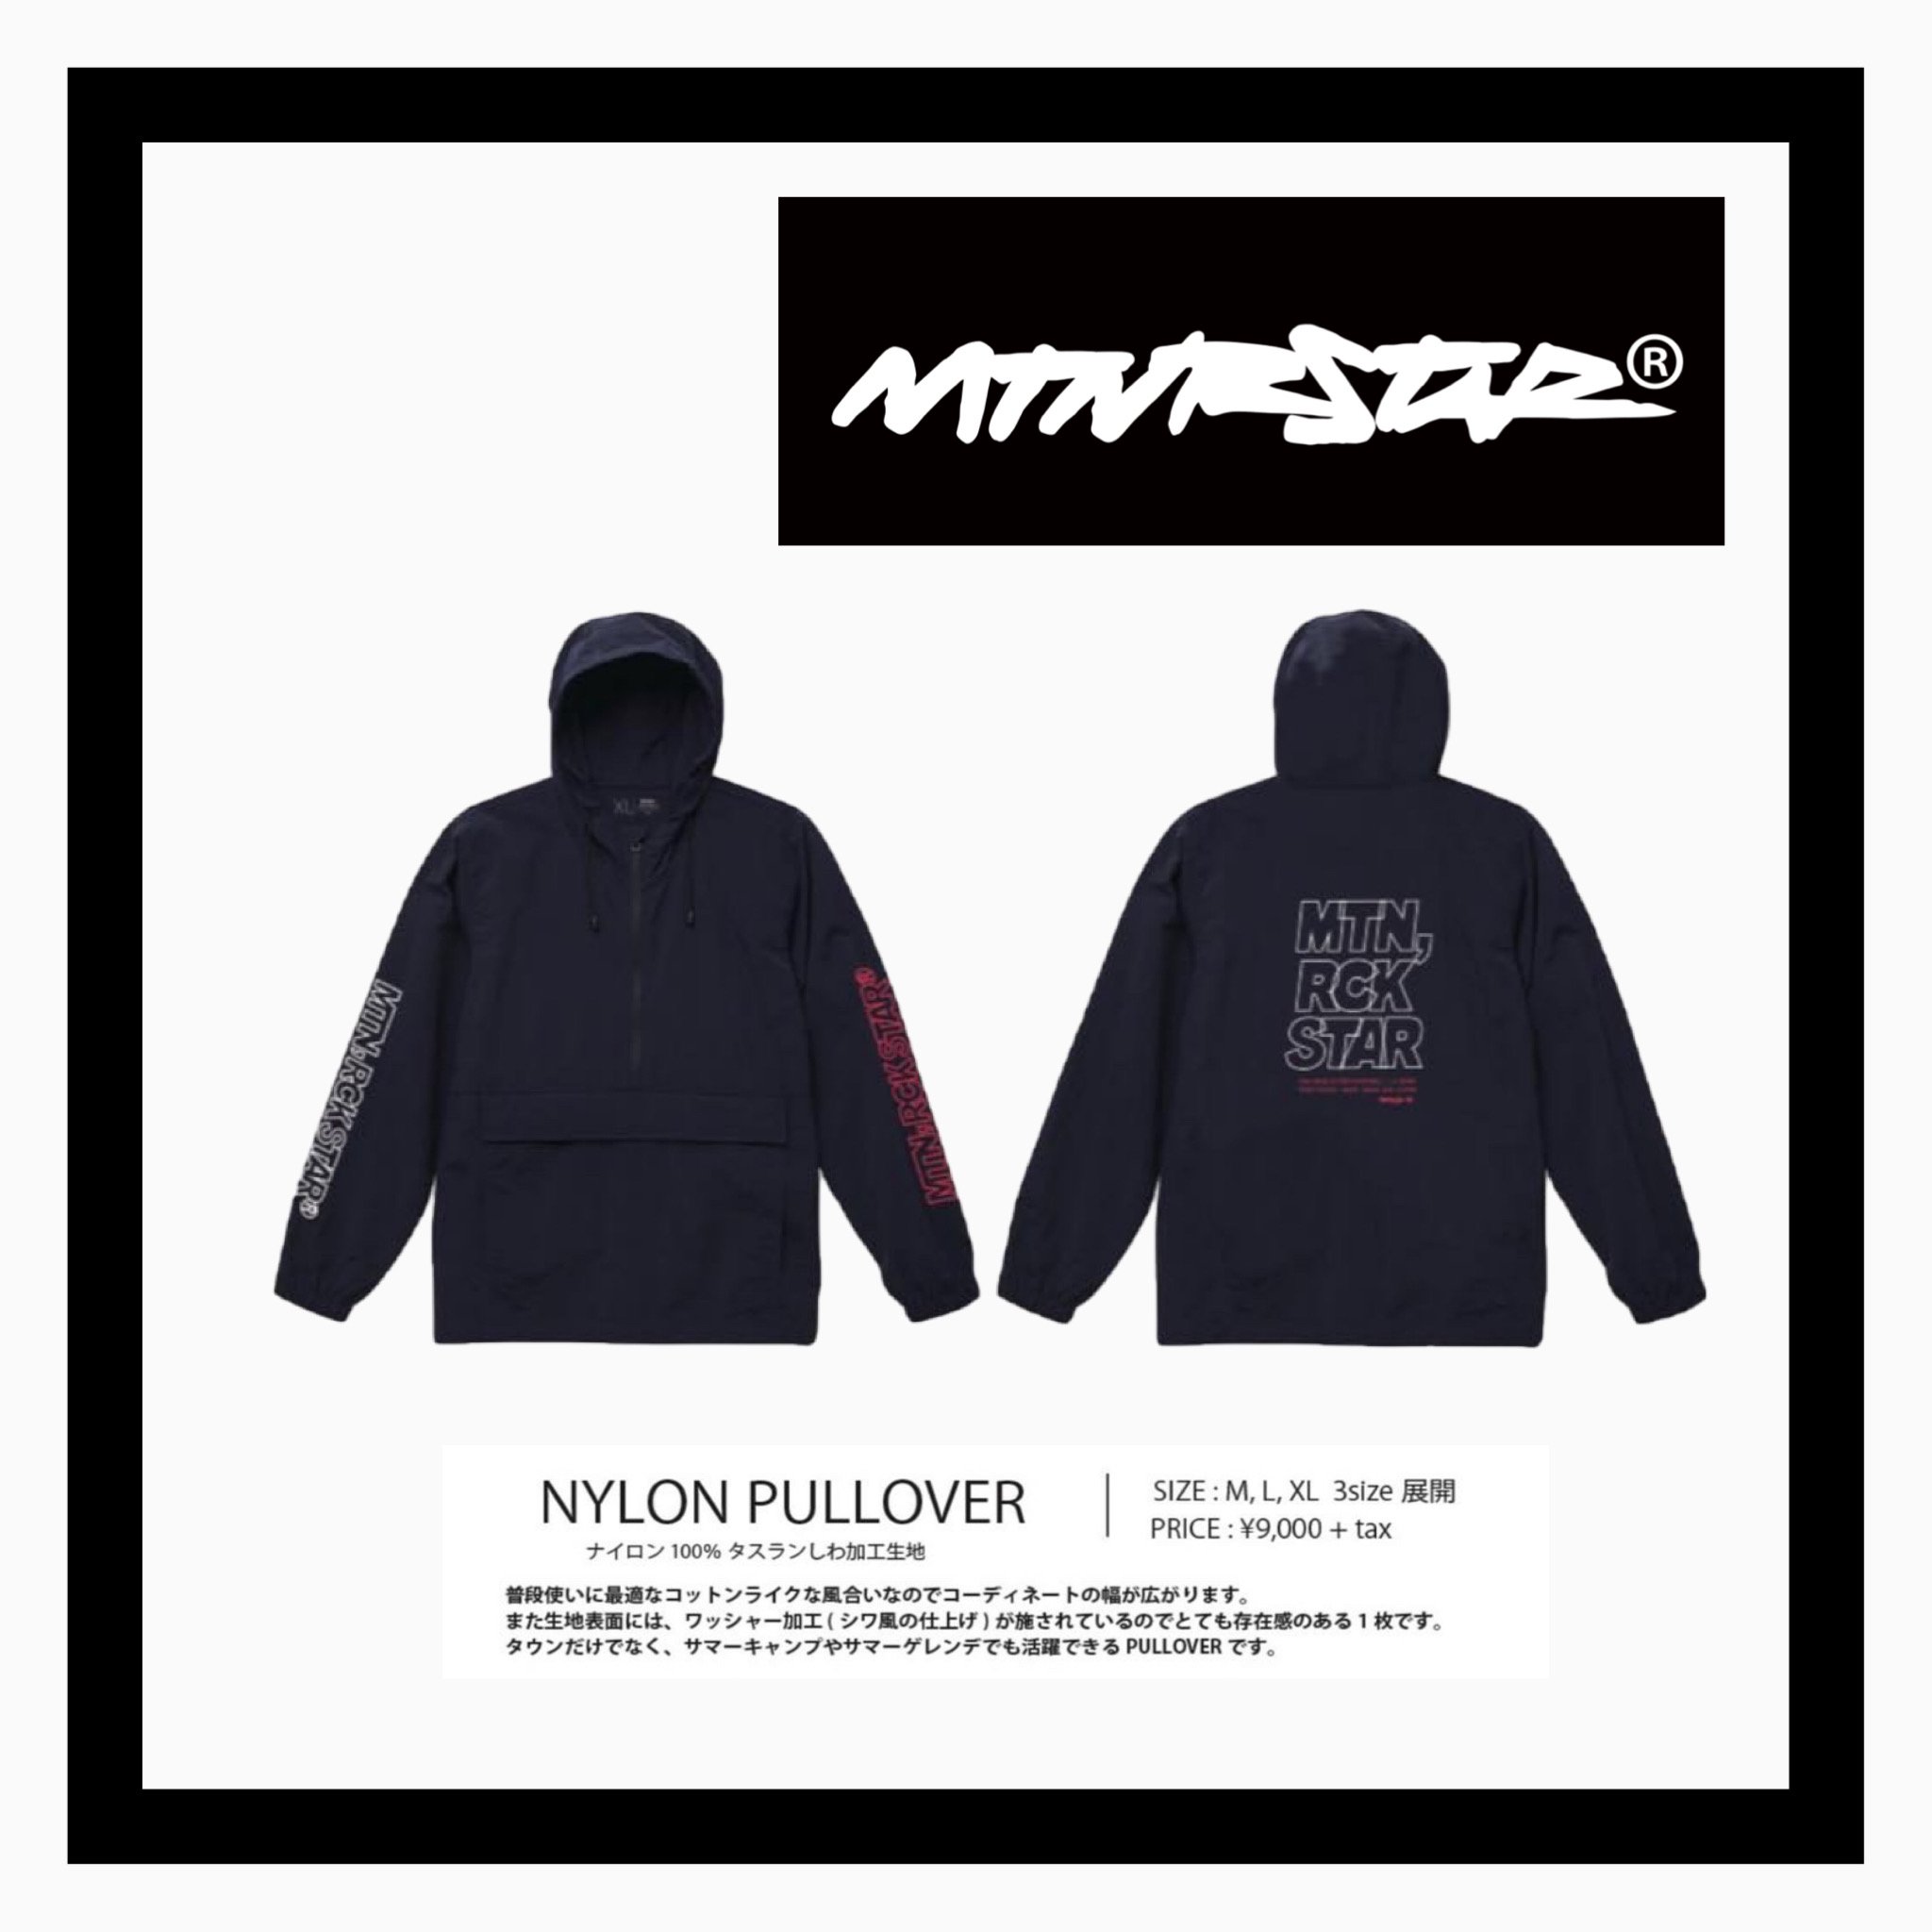 <img class='new_mark_img1' src='https://img.shop-pro.jp/img/new/icons14.gif' style='border:none;display:inline;margin:0px;padding:0px;width:auto;' />MOUNTAIN ROCK STAR Summer Apparel NYLON PULLOVER